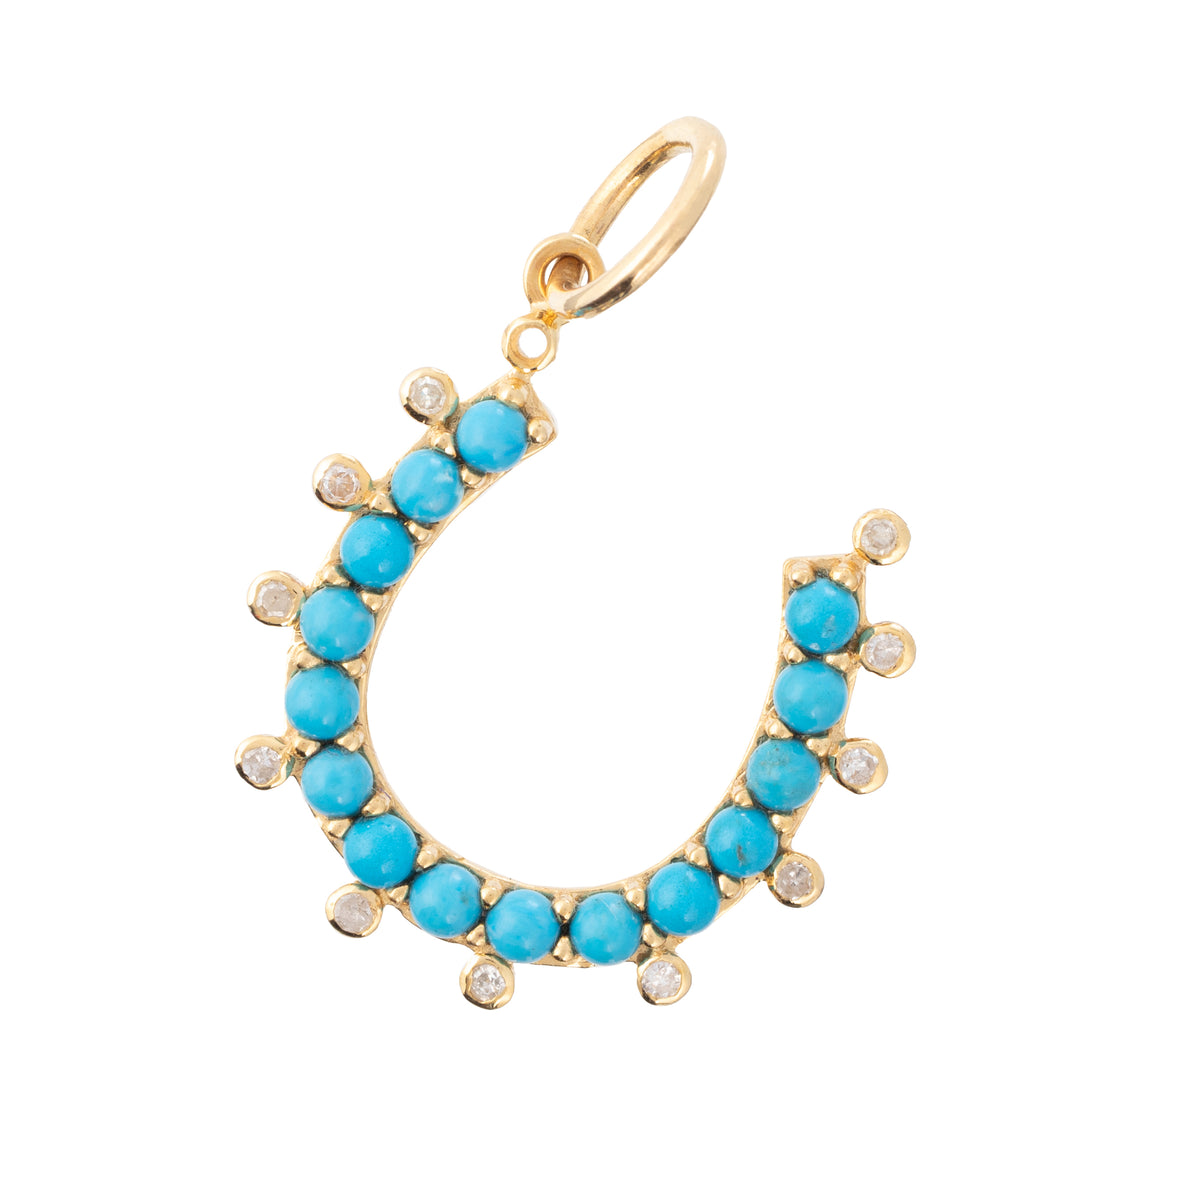 Grand Luck Charm with Turquoise